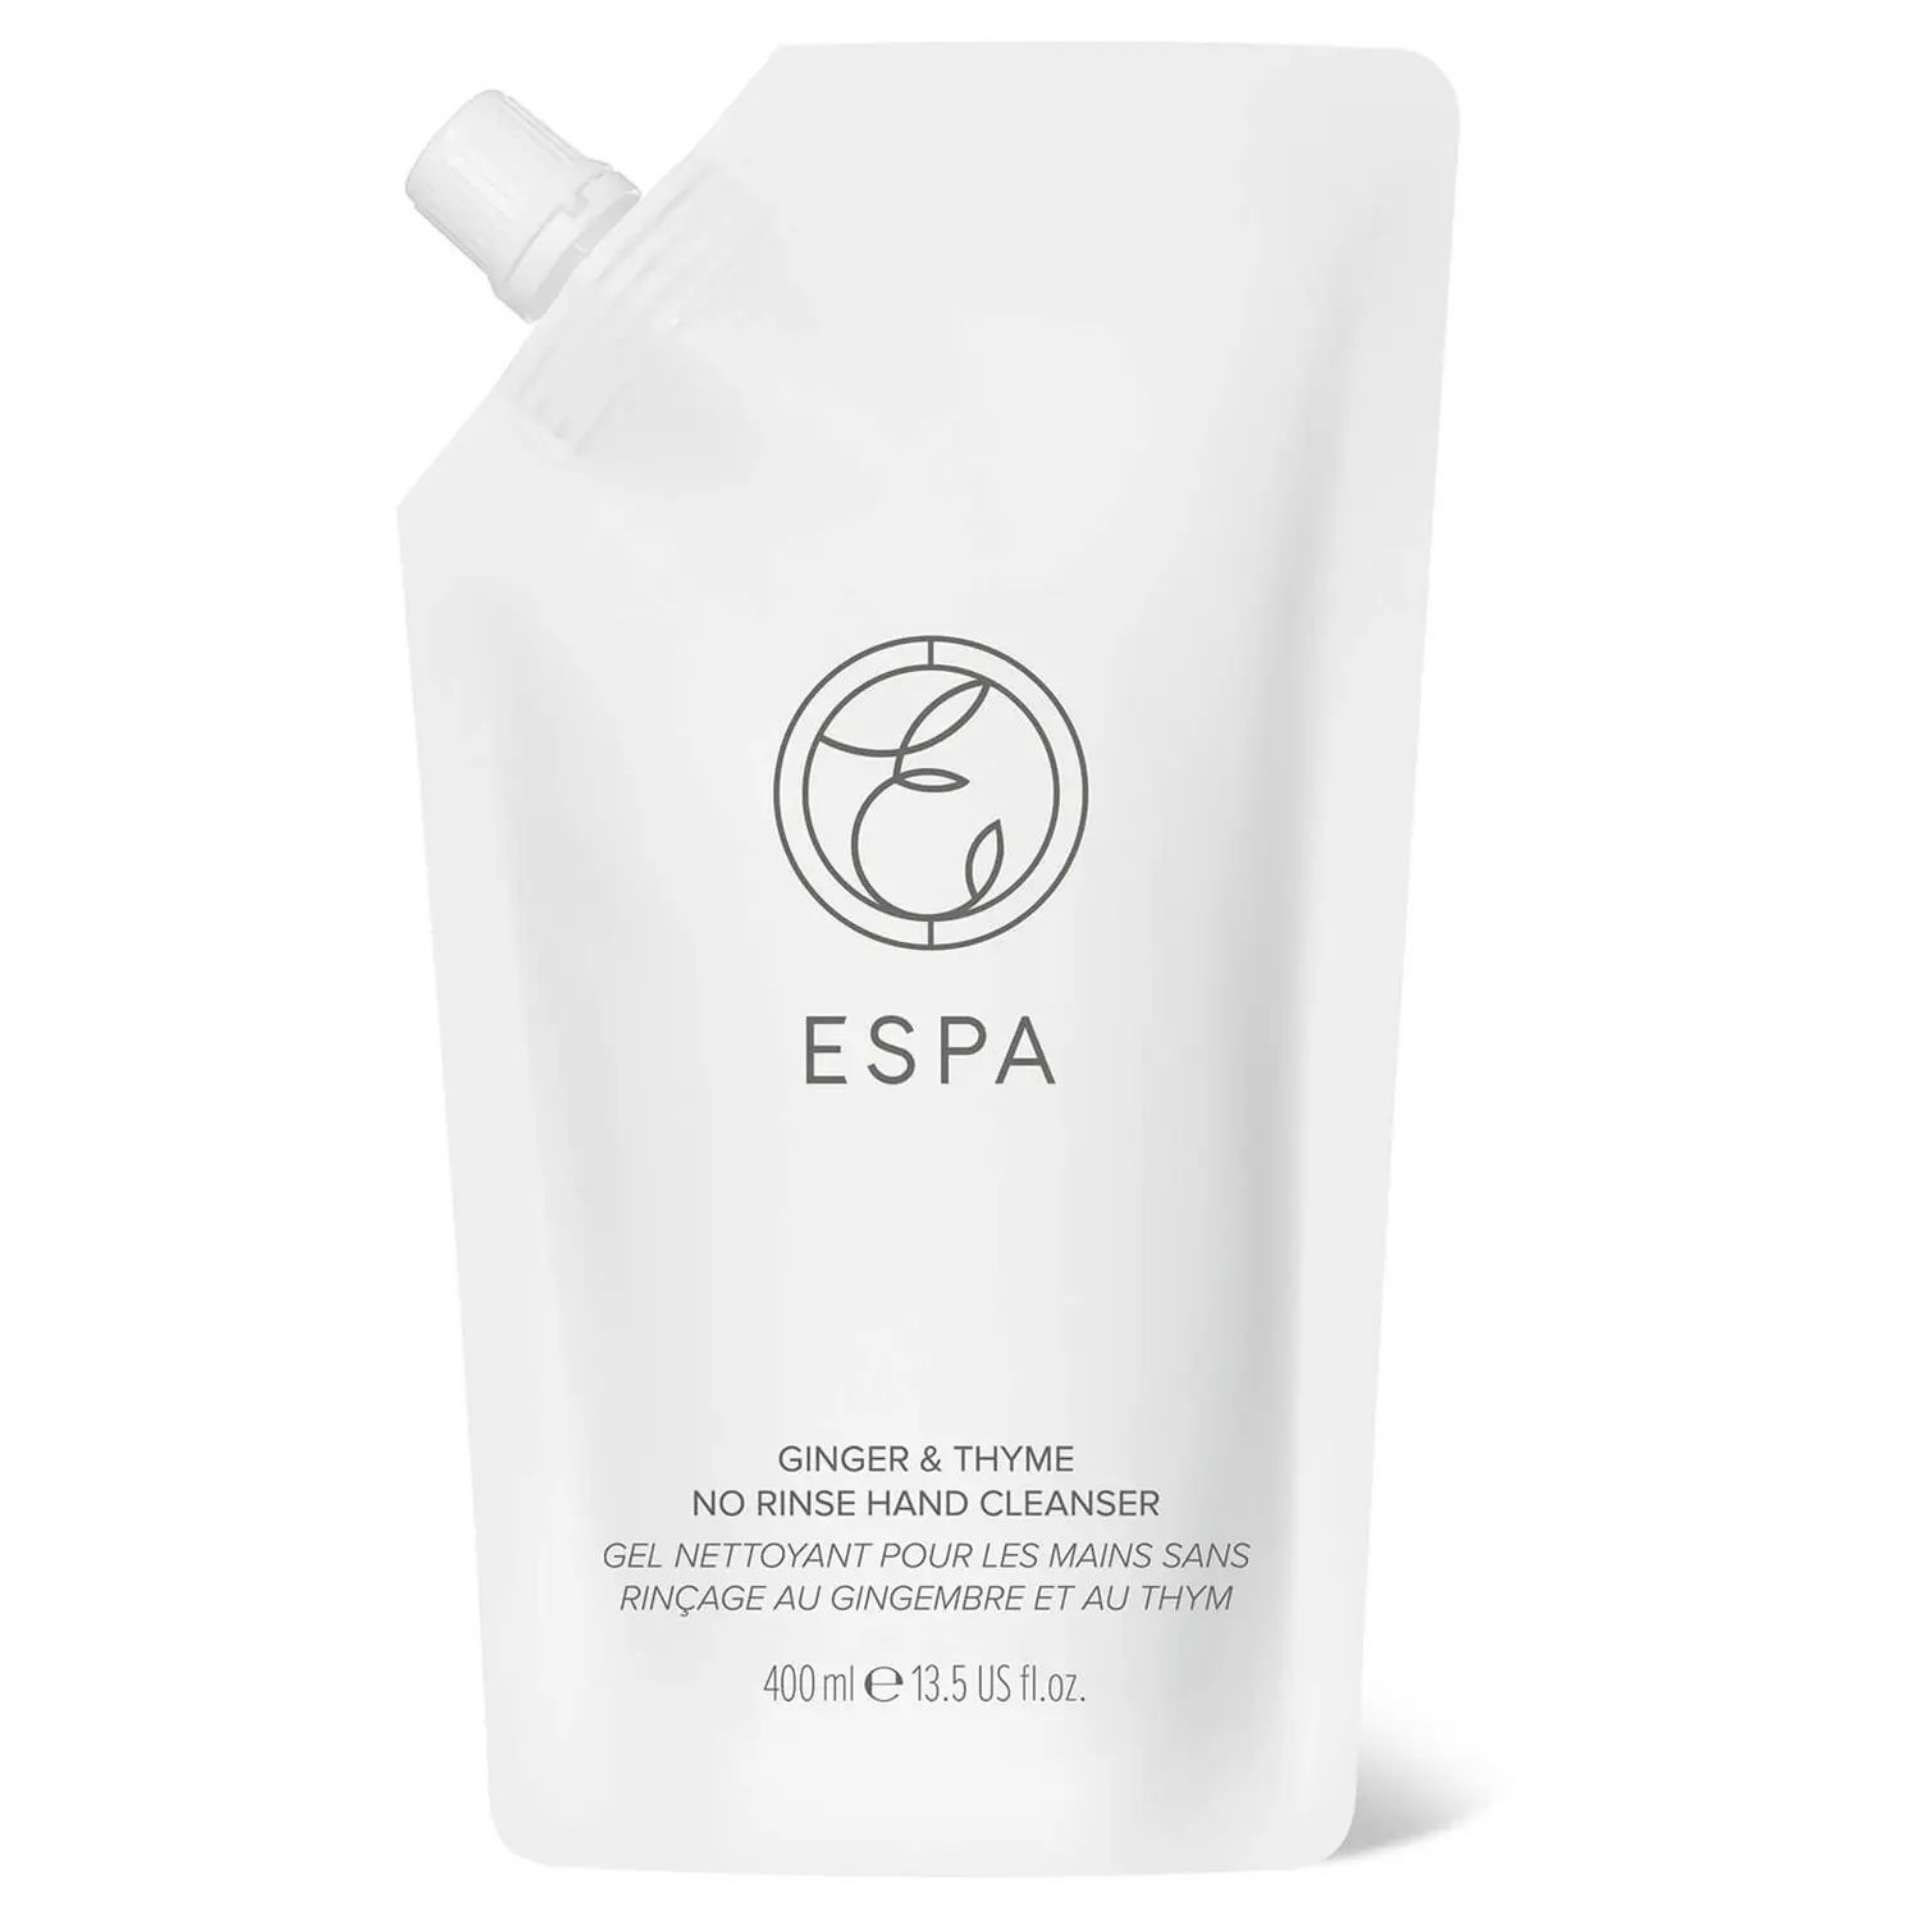 10x BRAND NEW ESPA Ginger & Thyme No Rinse Hand Cleanser 400ml RRP £25 EACH. EBR2. An alcohol-